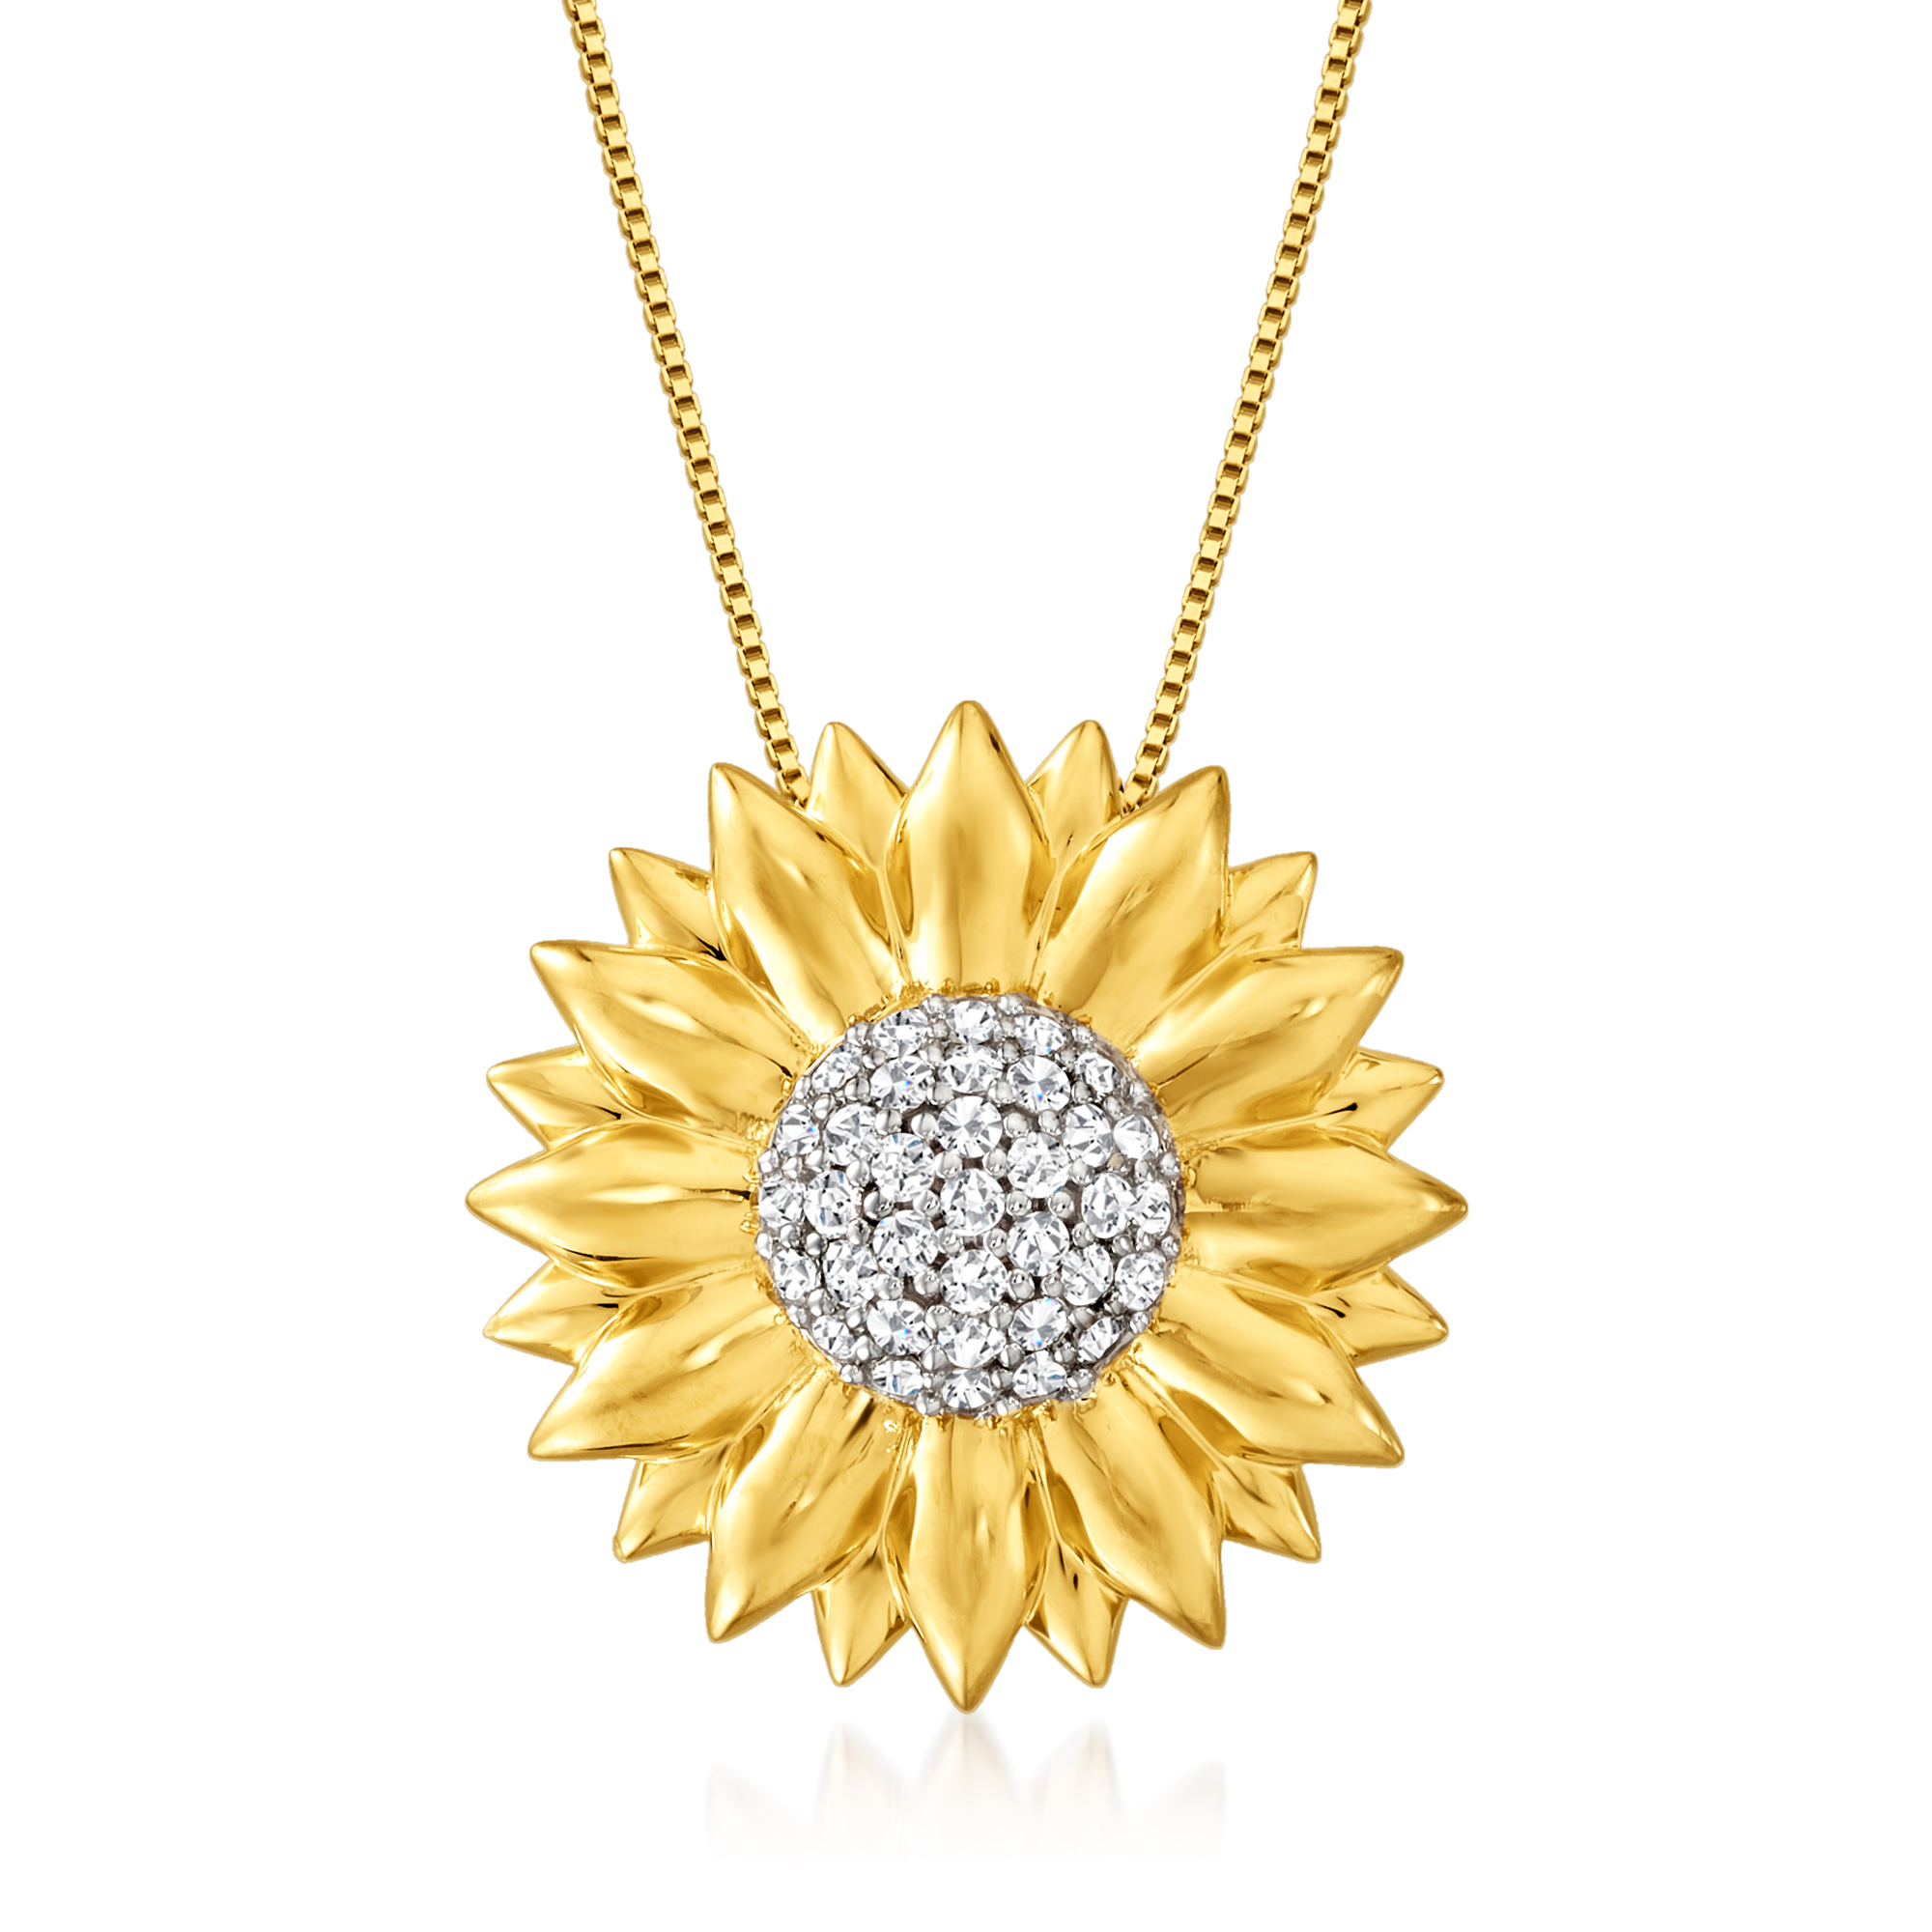 Pewter 3 Charm Necklace-Sunflower